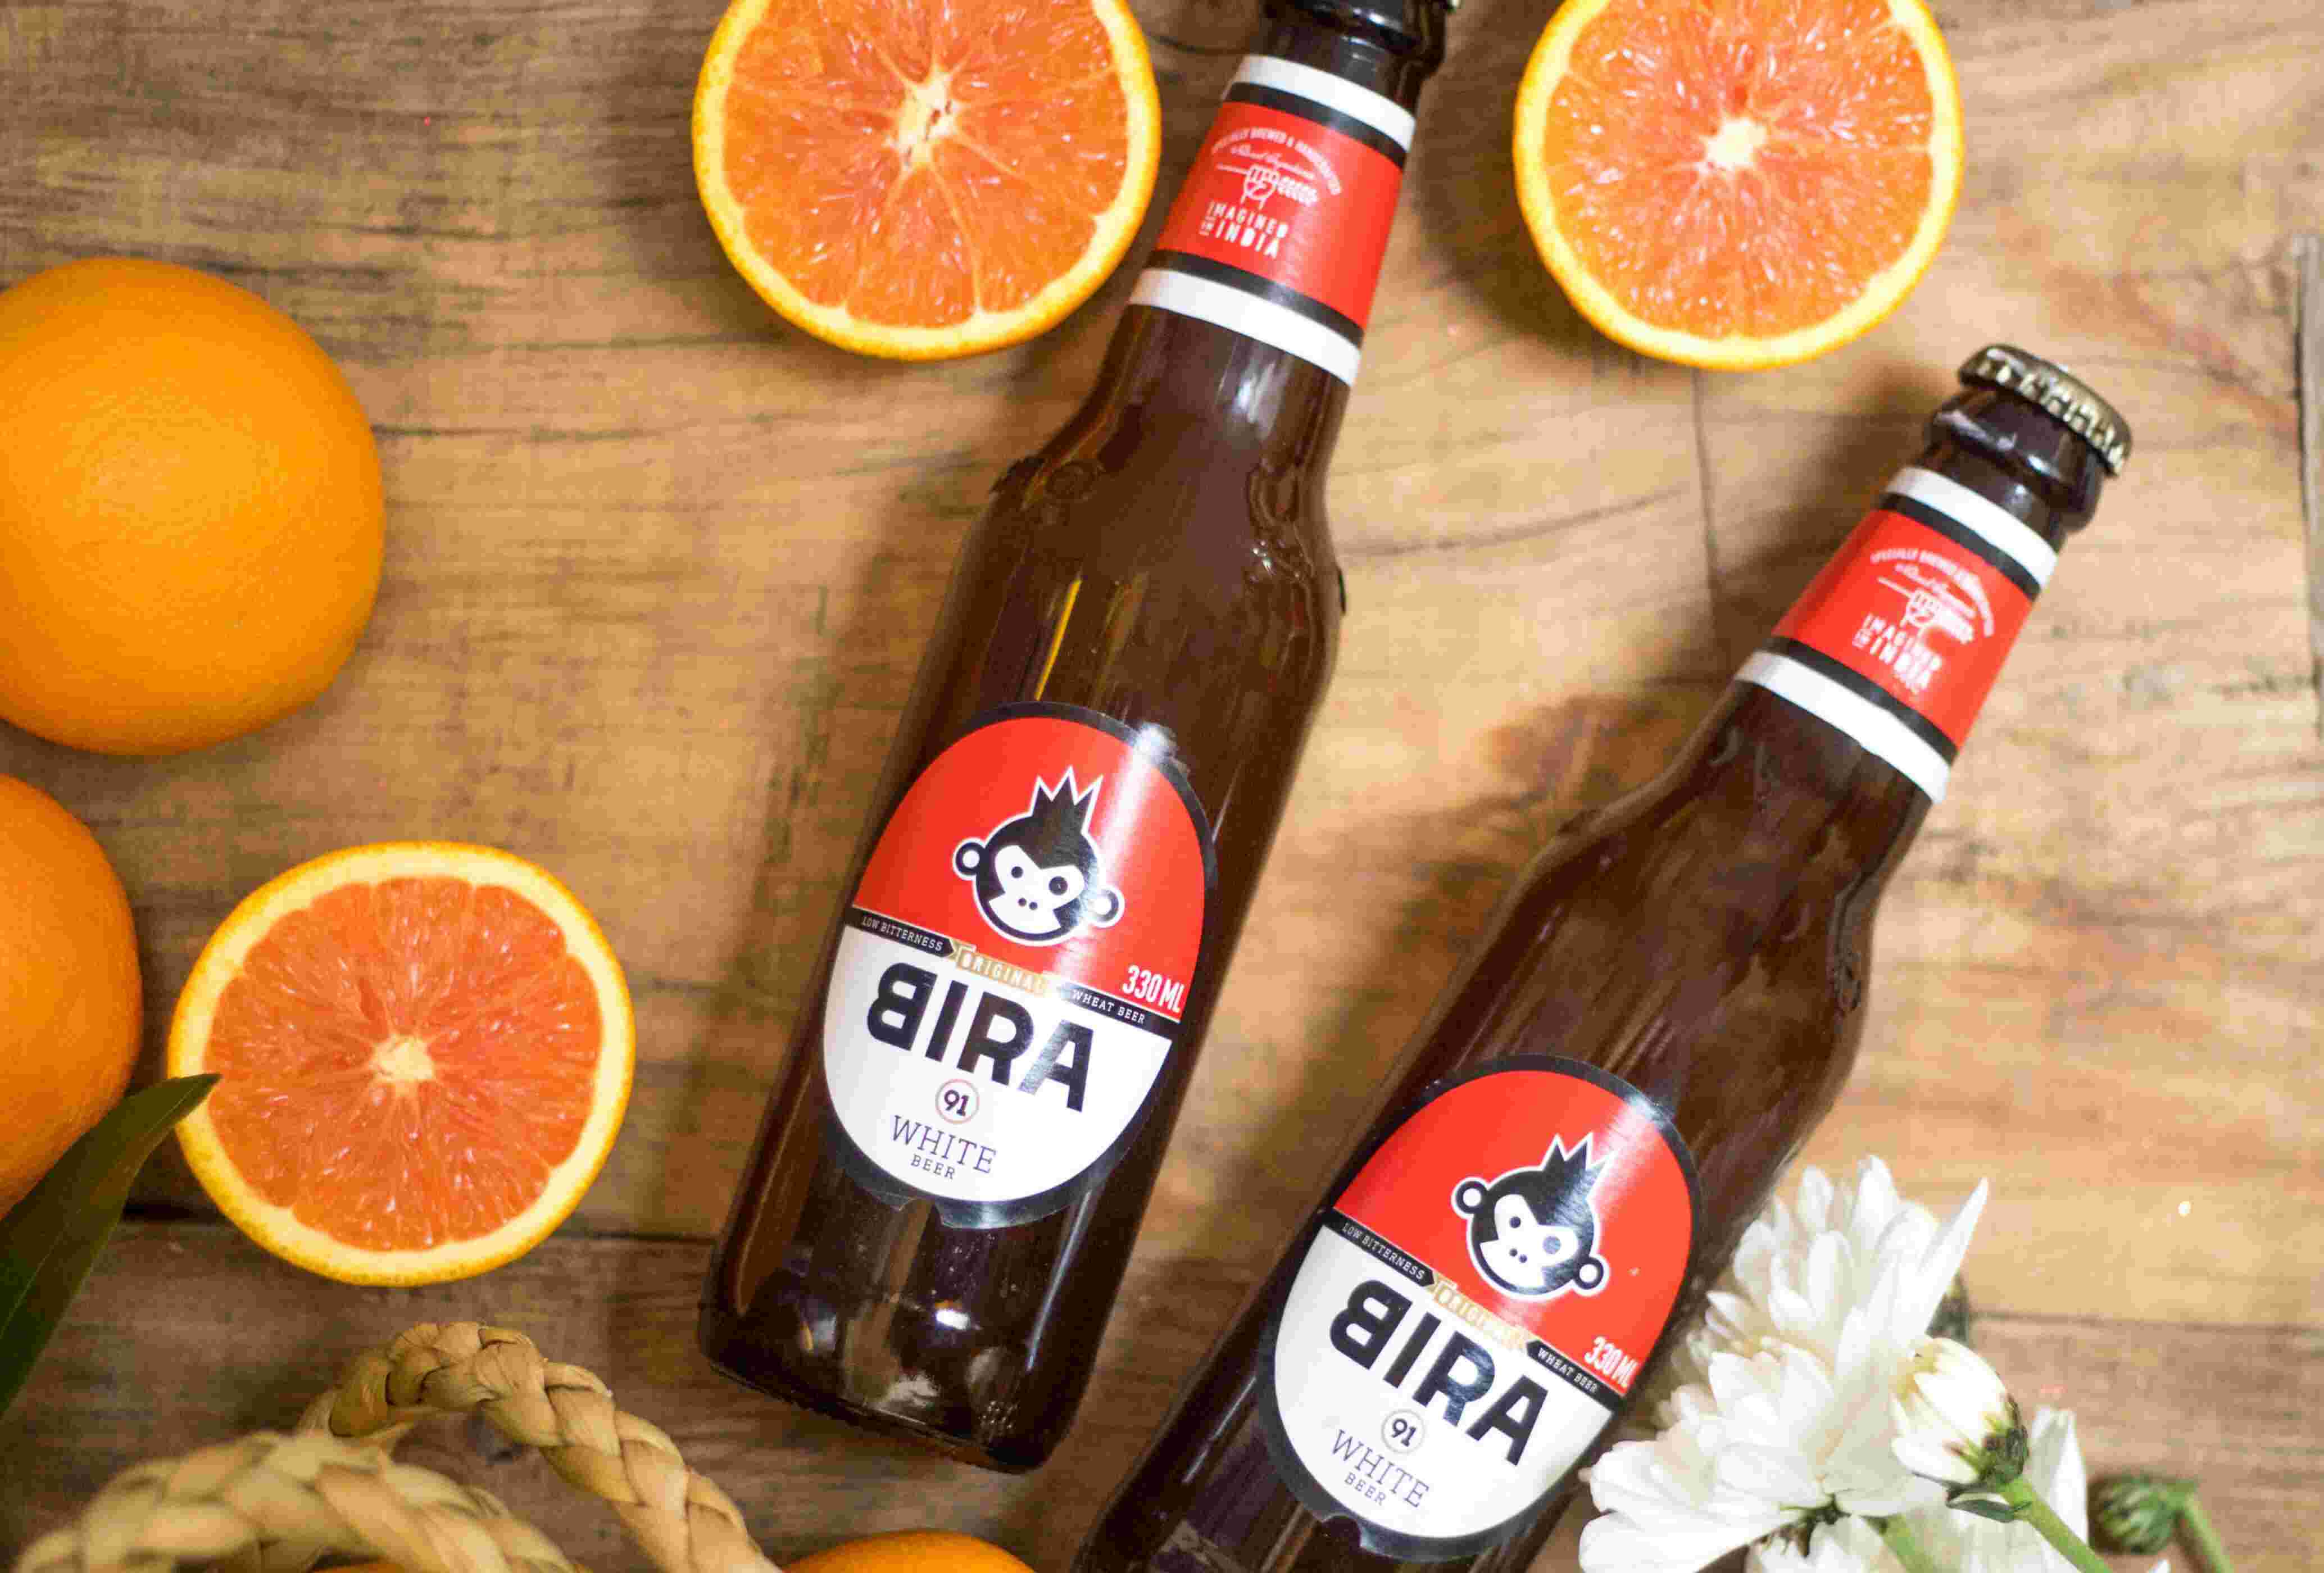 bira beer unlisted shares